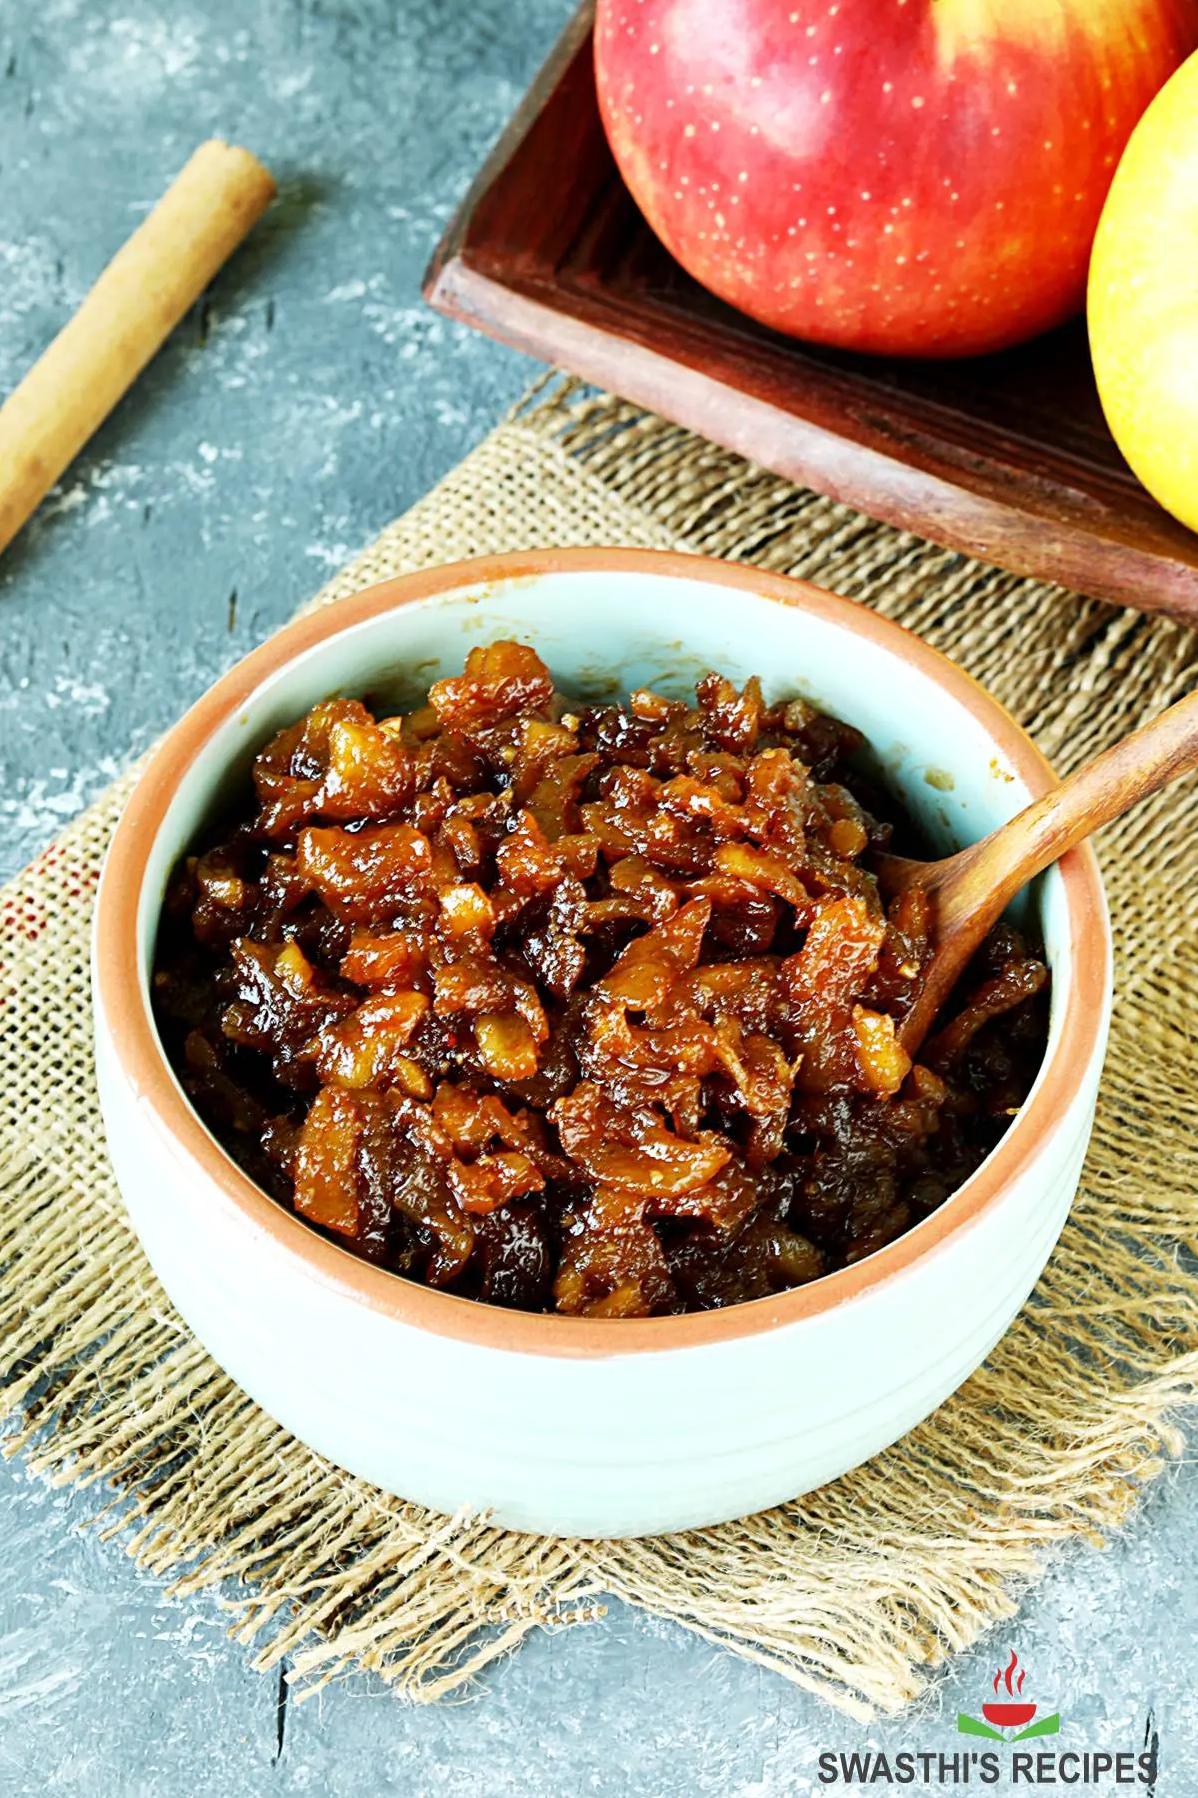  A spoonful of this chutney can elevate a simple ham or turkey sandwich.